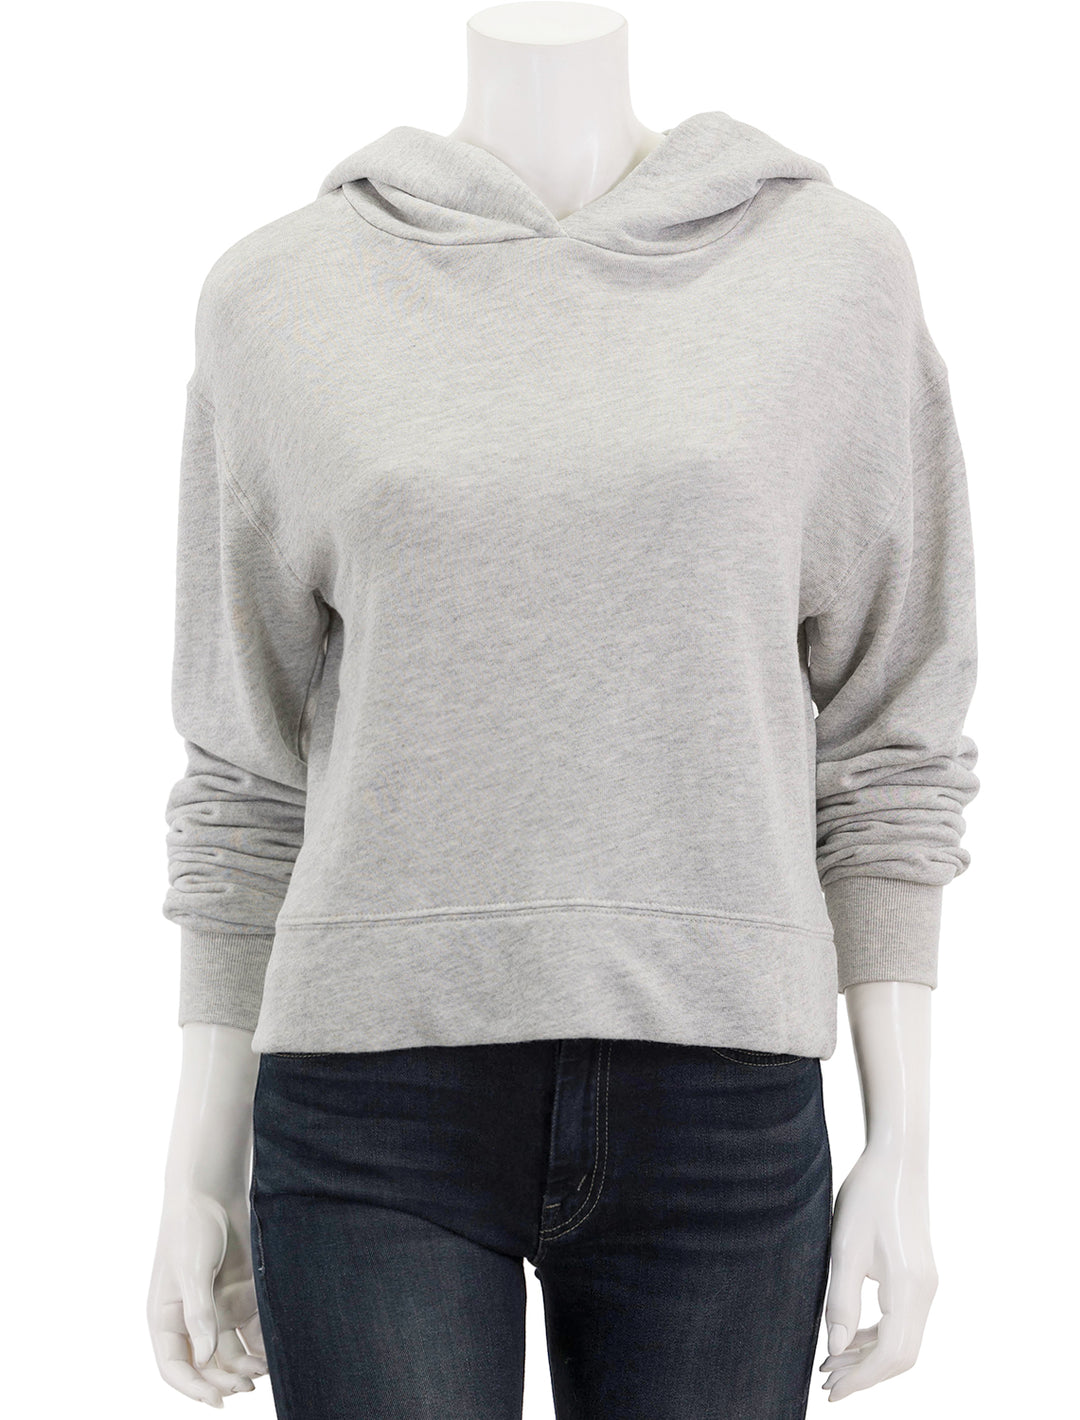 Front view of Perfectwhitetee's iggy hoodie in heather grey.